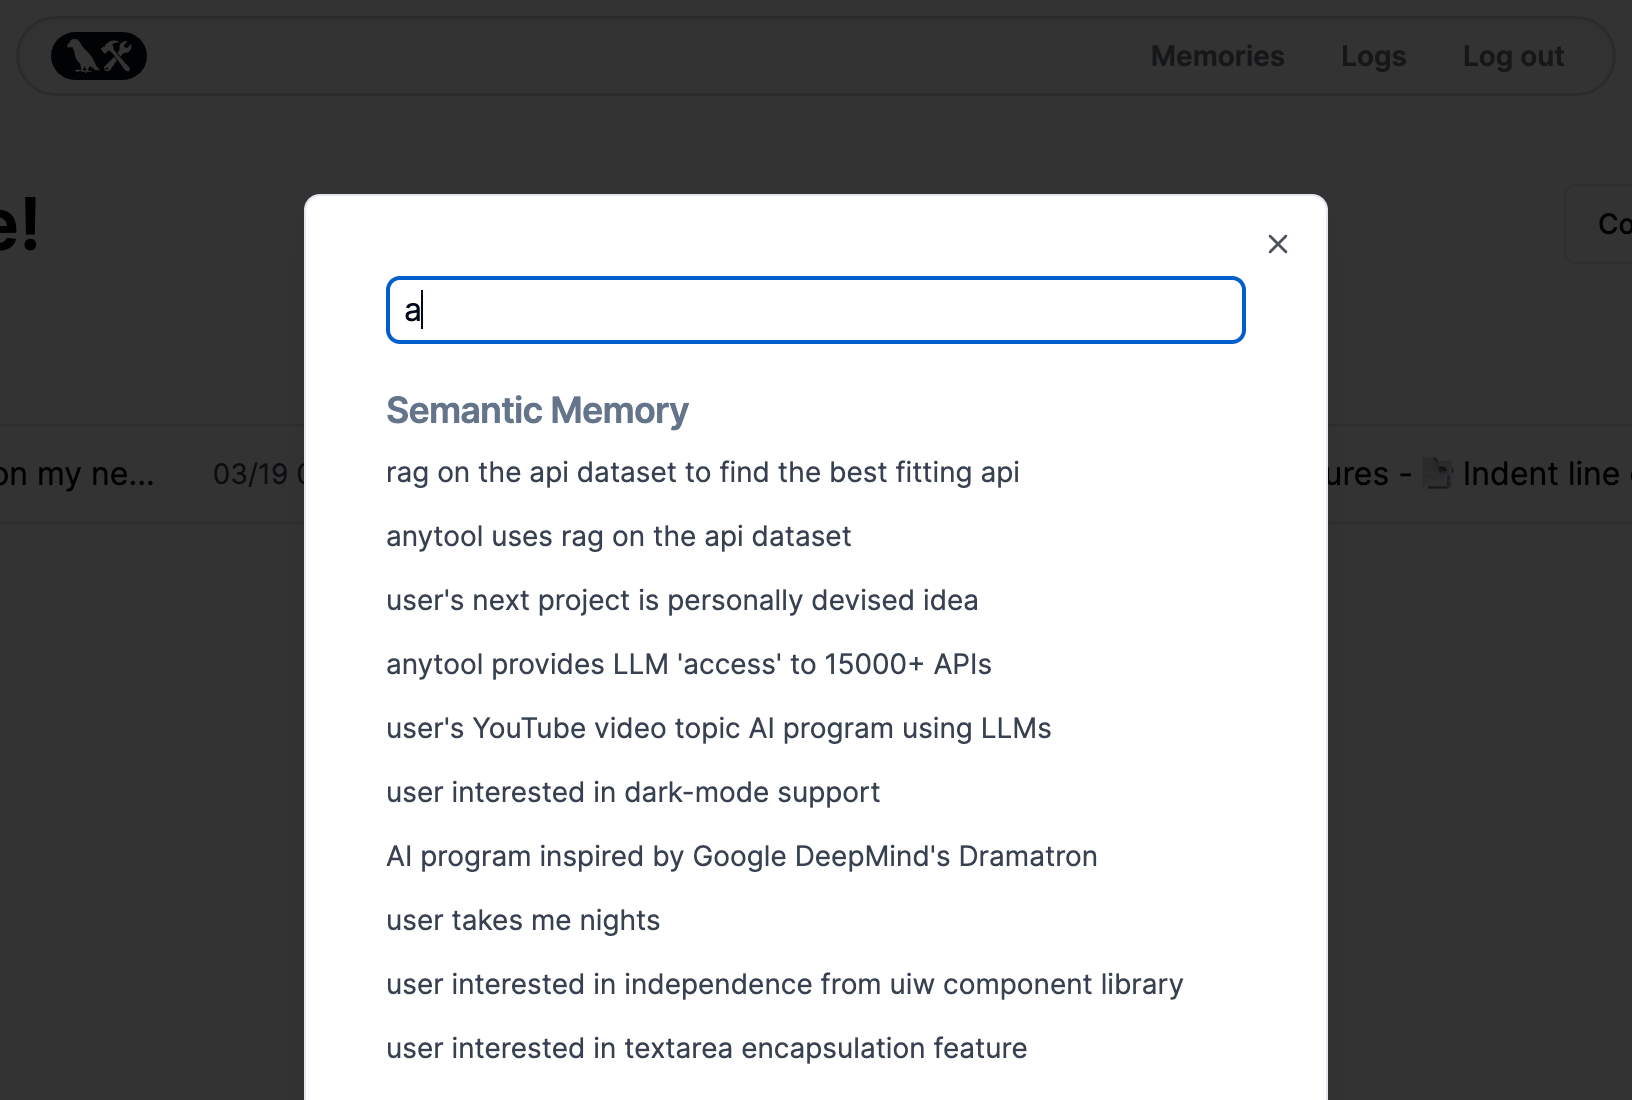 LangFriend: a Journal with Long-Term Memory